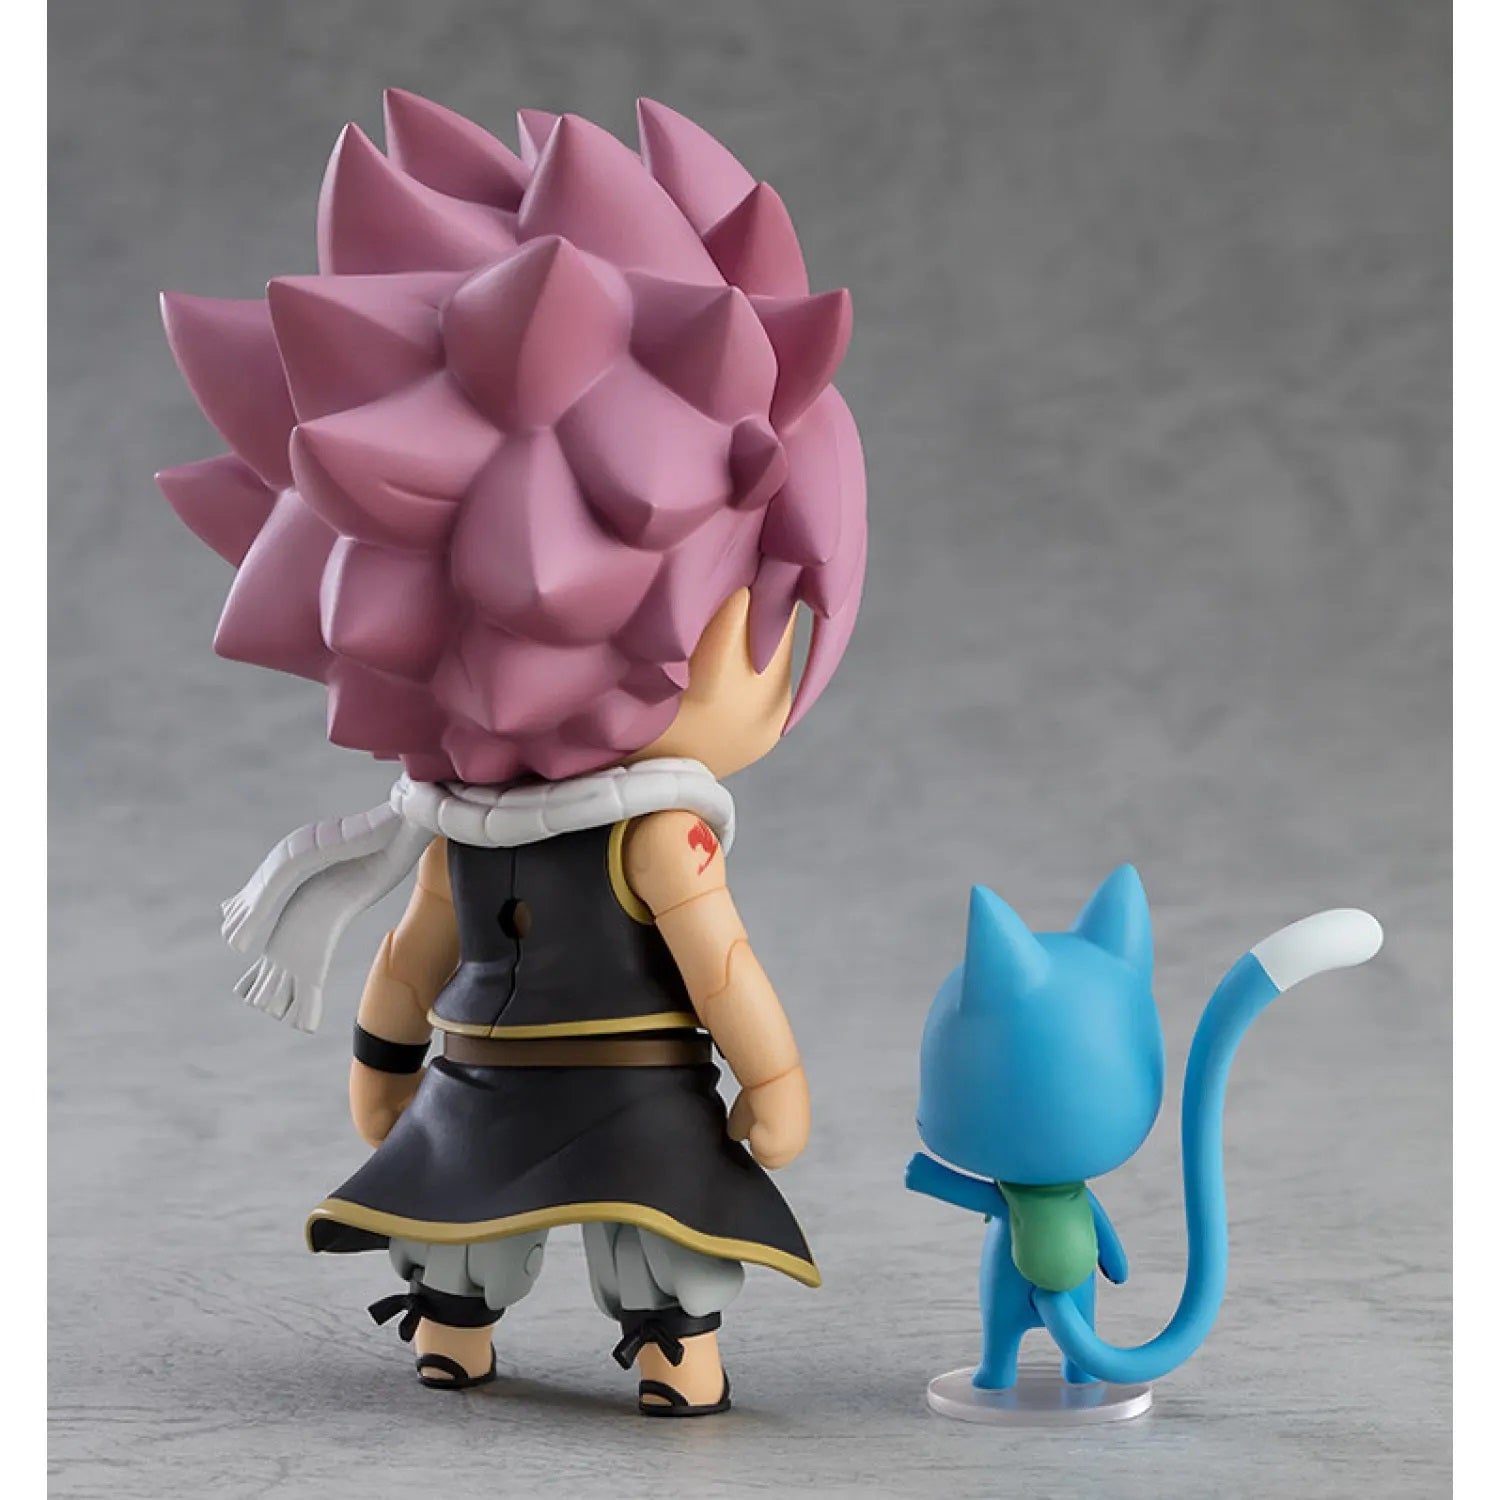 Fairy Tail Final Season Nendoroid [1741] "Natsu Dragneel"-Max Factory-Ace Cards & Collectibles